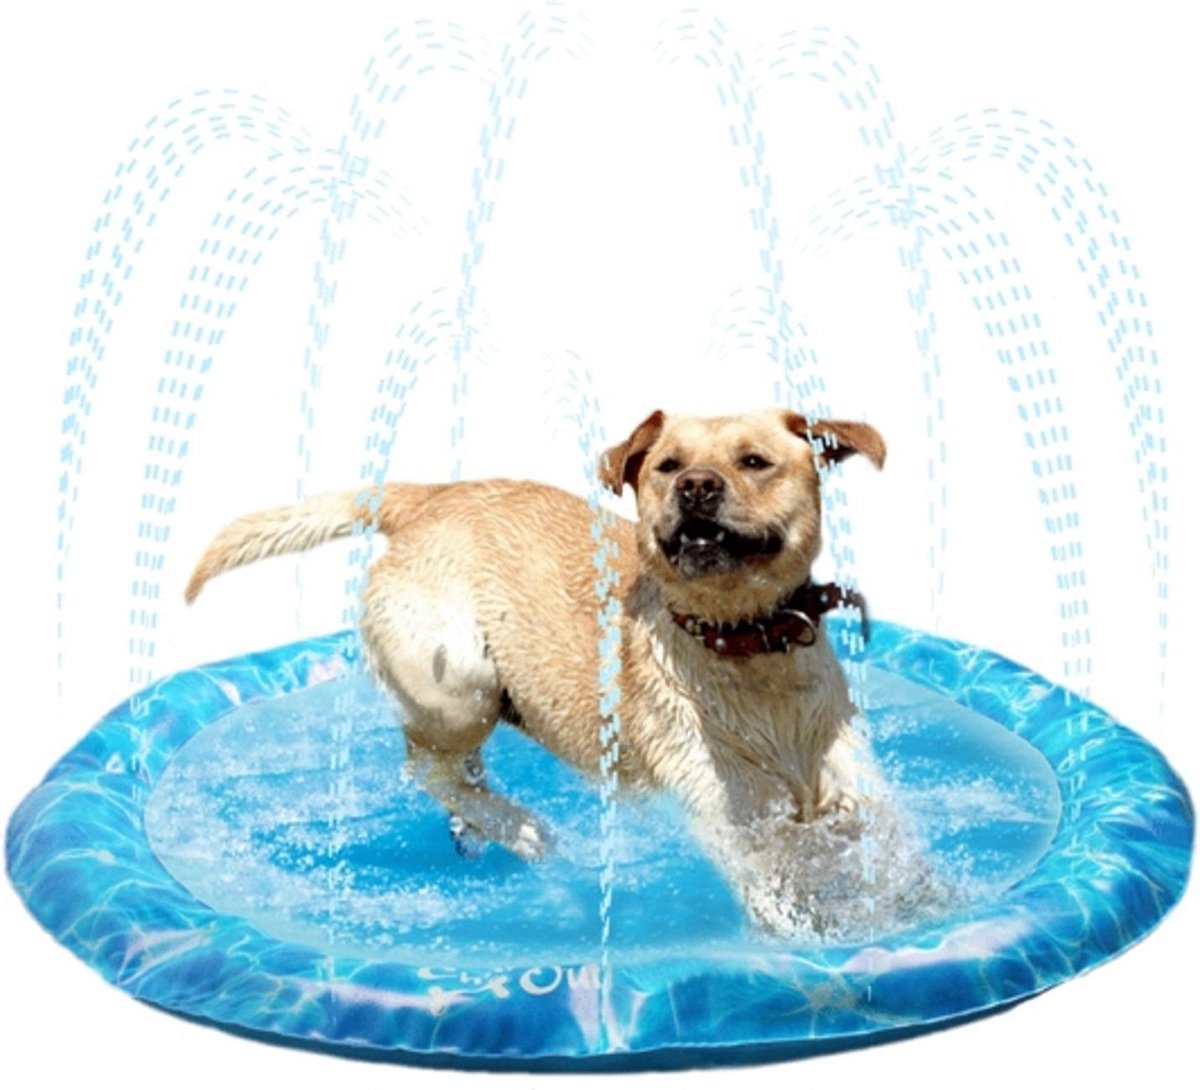 All For Paws Chill Out Bad Met Fontein - Hondenverkoeling - 126x8 cm - Blauw - Large